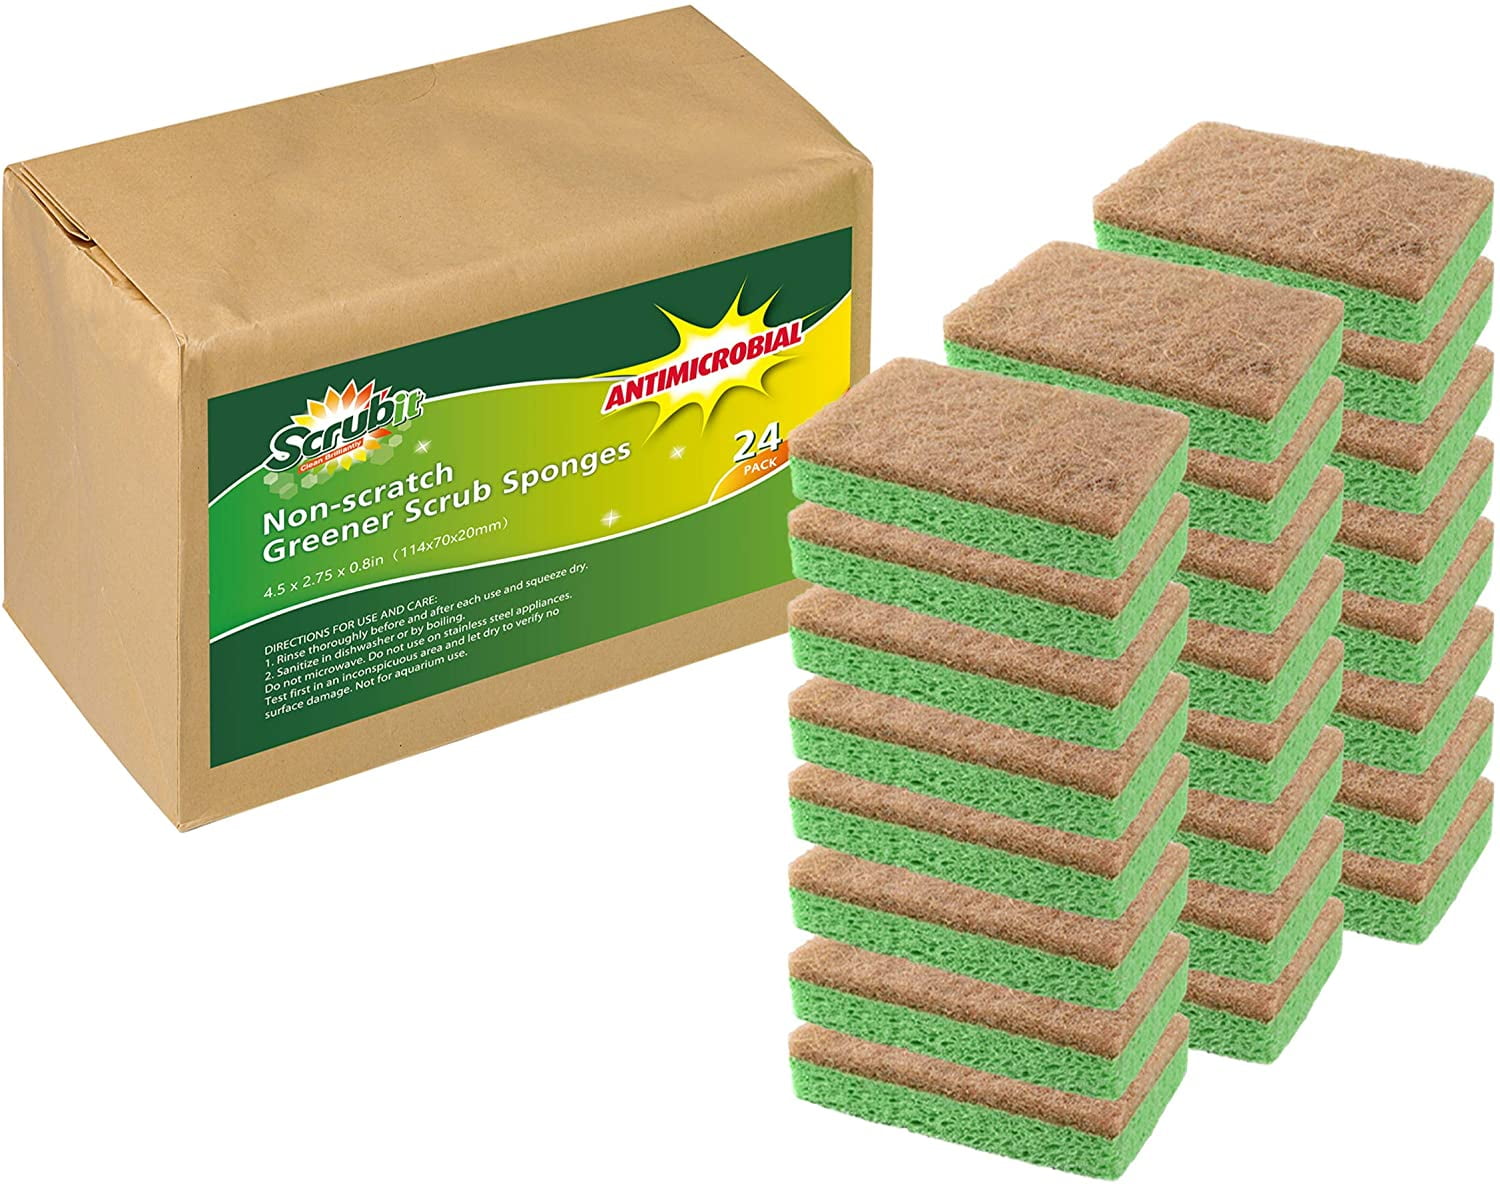 The Best Reusable Sponges You Can Buy on  – SheKnows